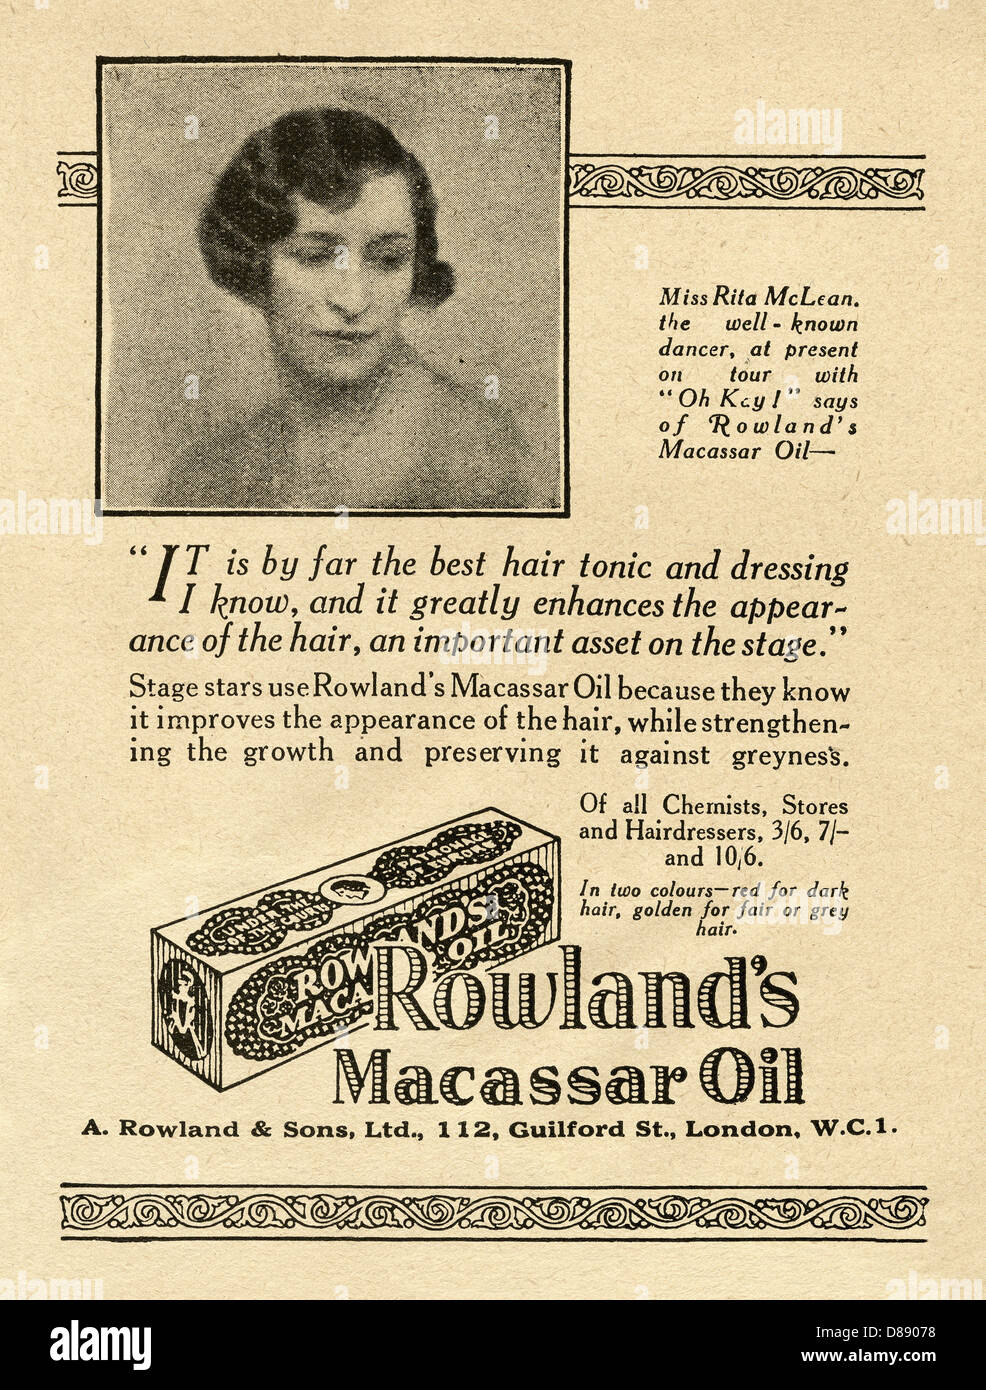 1928 advert for Rowland's Macassar oil - a hair tonic. It is endorsed by dancer Rita McLean who is photographed Stock Photo